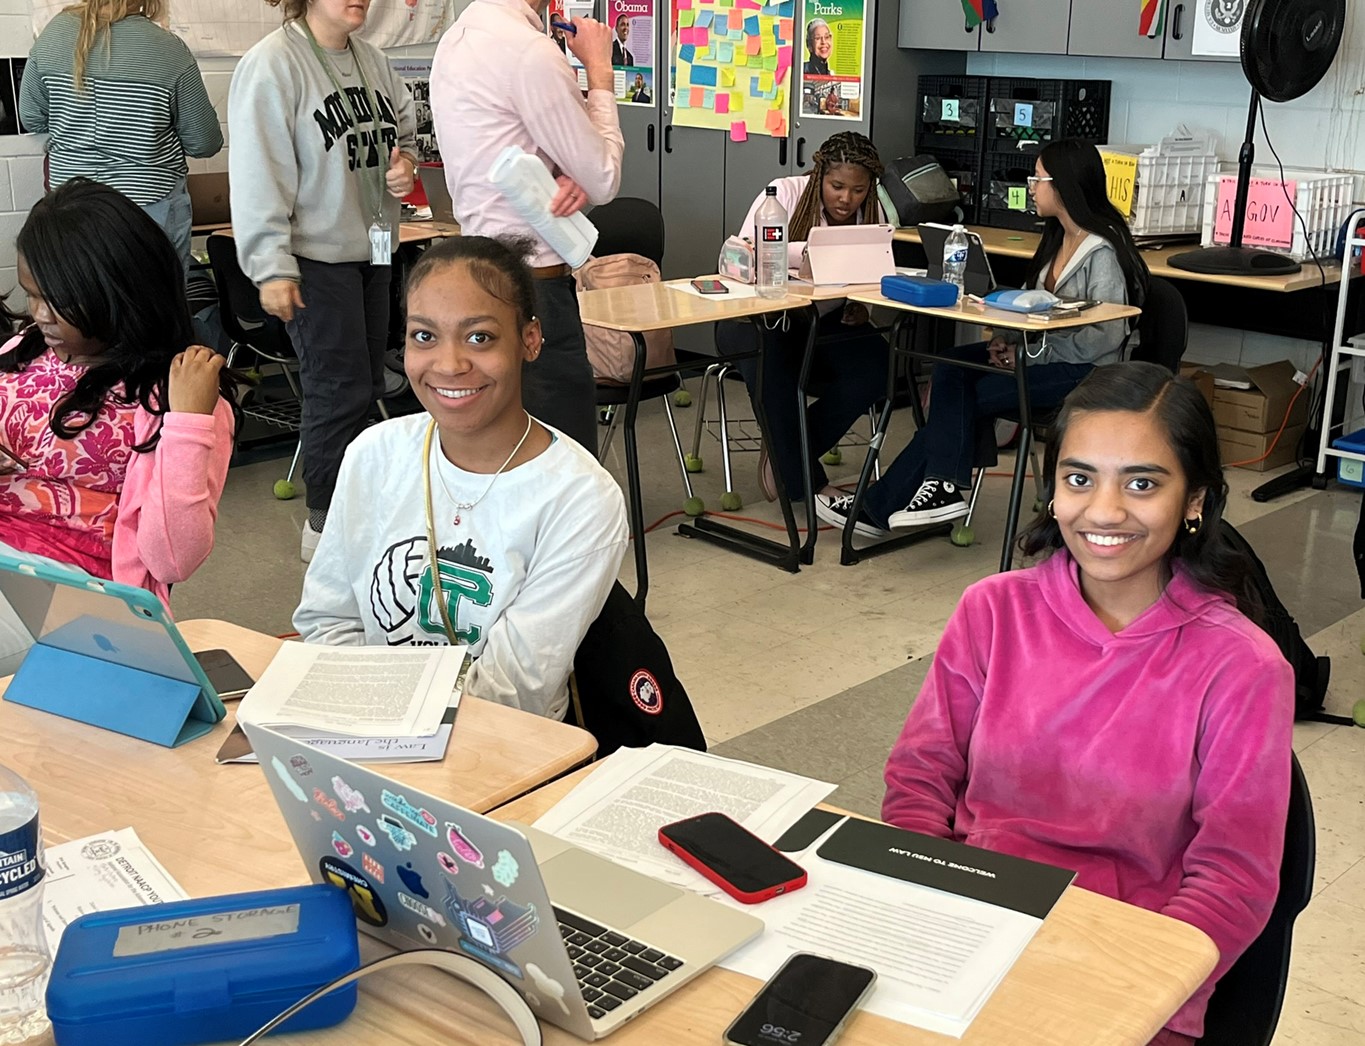 Cass Technical High School seniors Jesssica McCloud and Aditi Roy said they were surprised and disappointed to learn that cases involving enslaved people are still cited as legal precendent today.